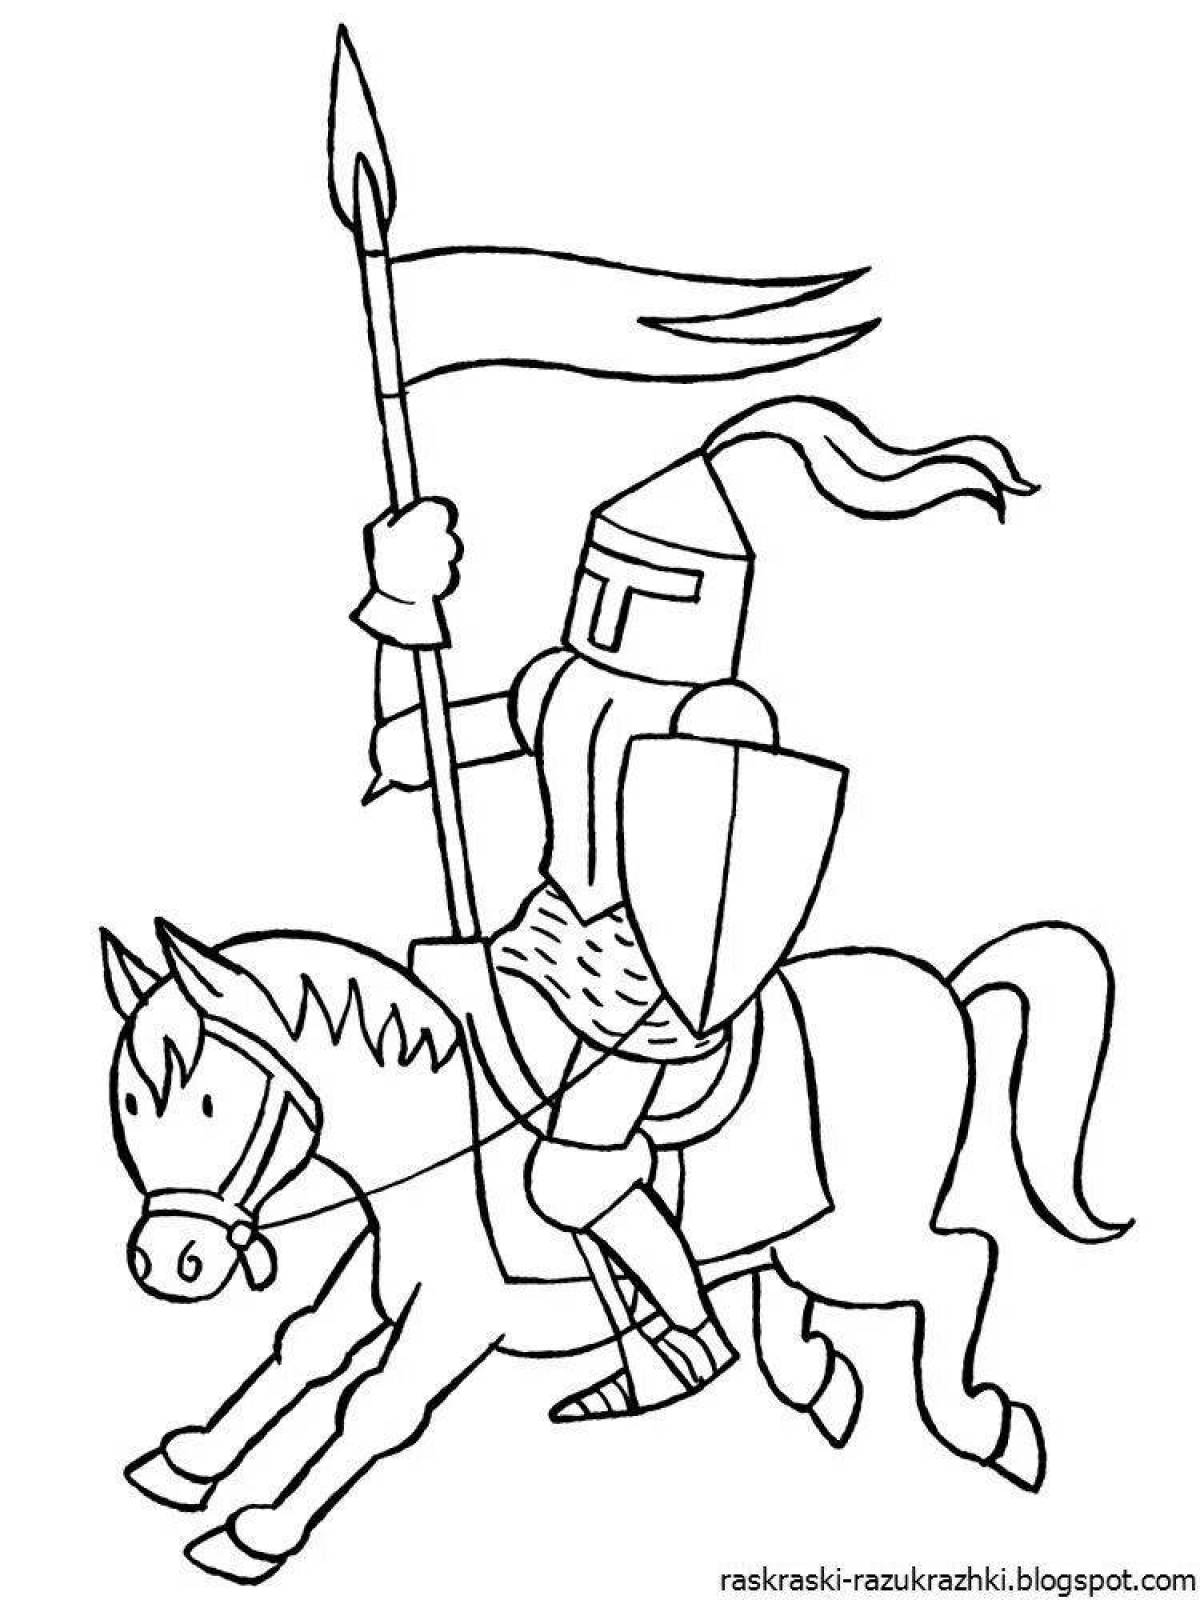 Famous knight on horseback coloring book